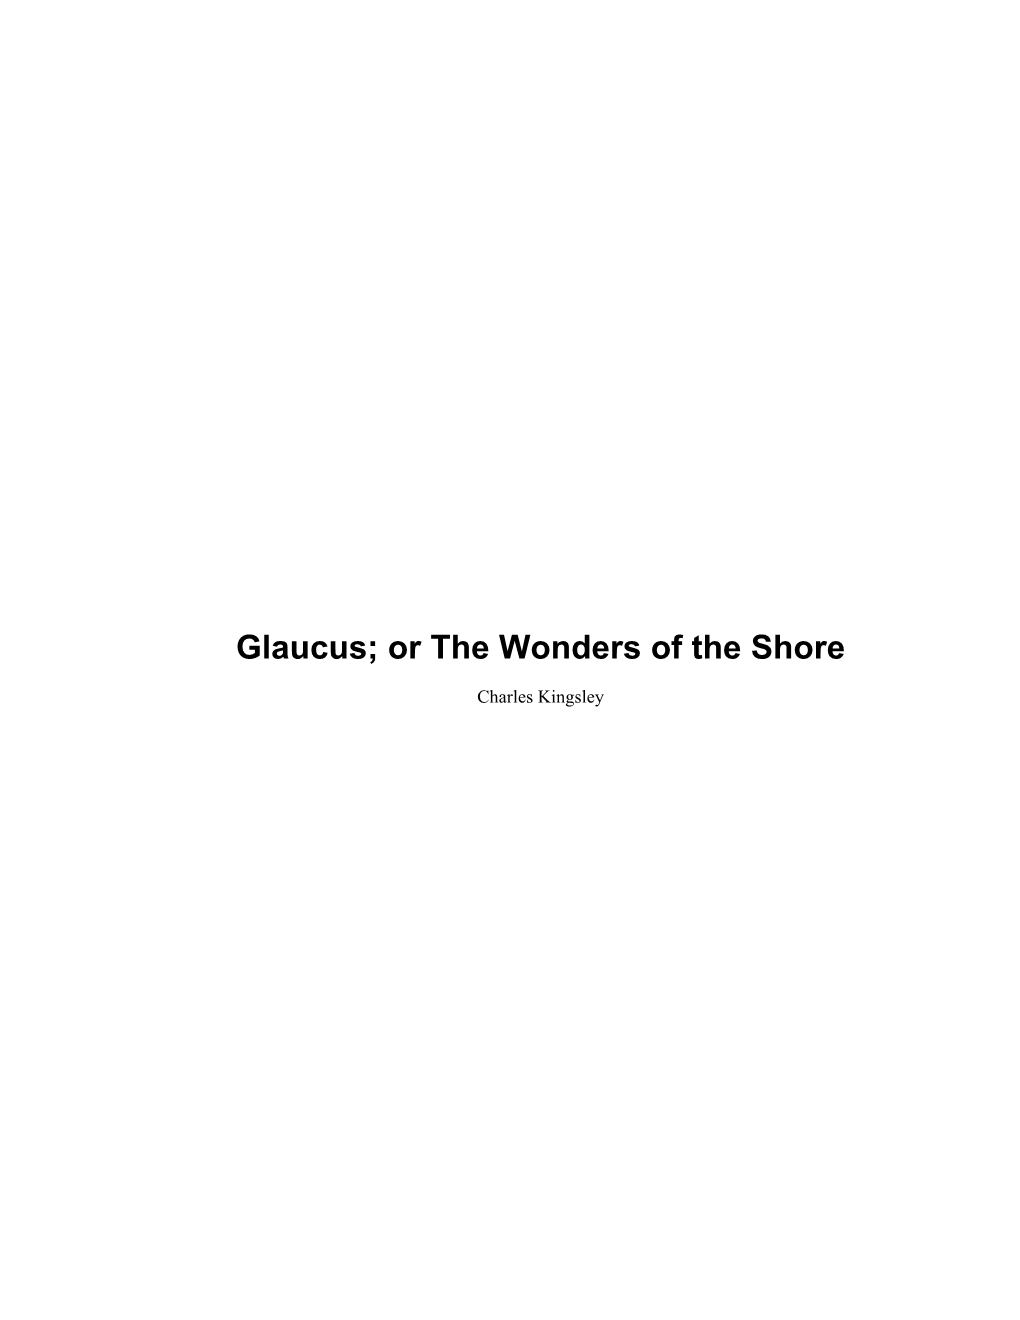 Glaucus; Or the Wonders of the Shore